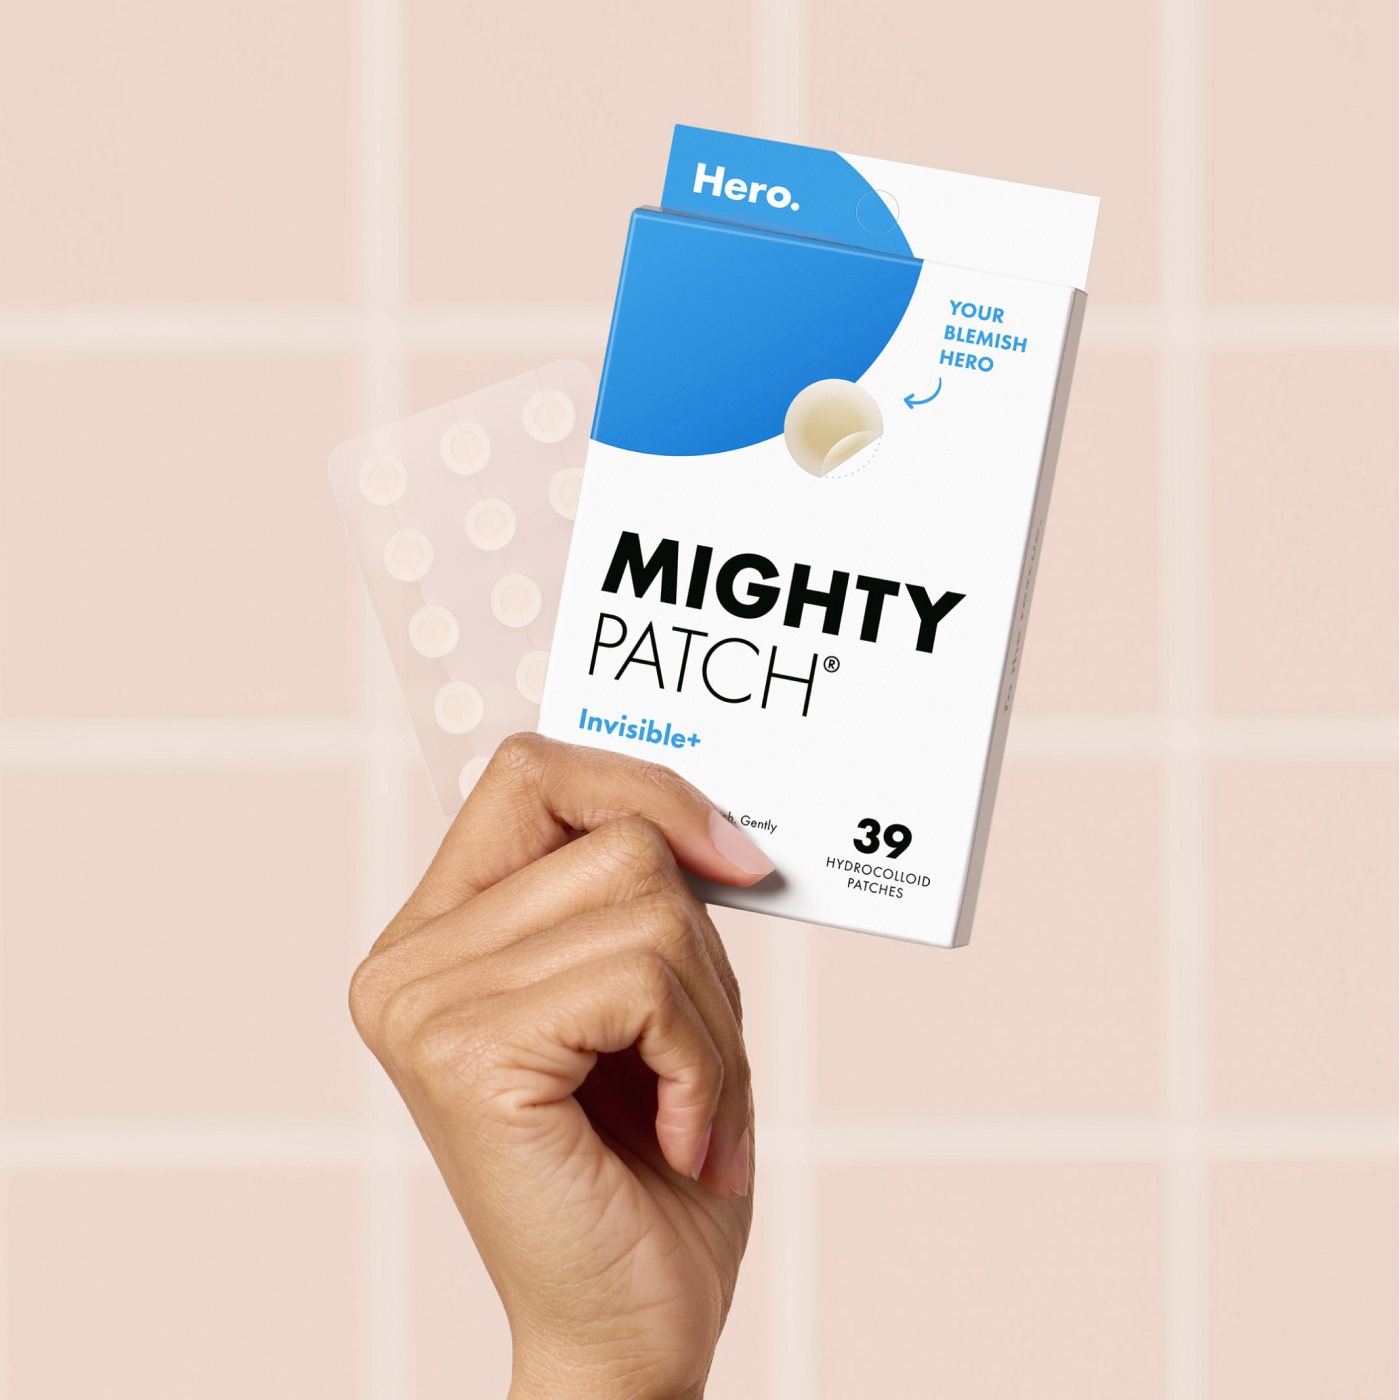 Mighty Patch, Micropoint for Dark Spots, 6 Patches, Hero Cosmetics 